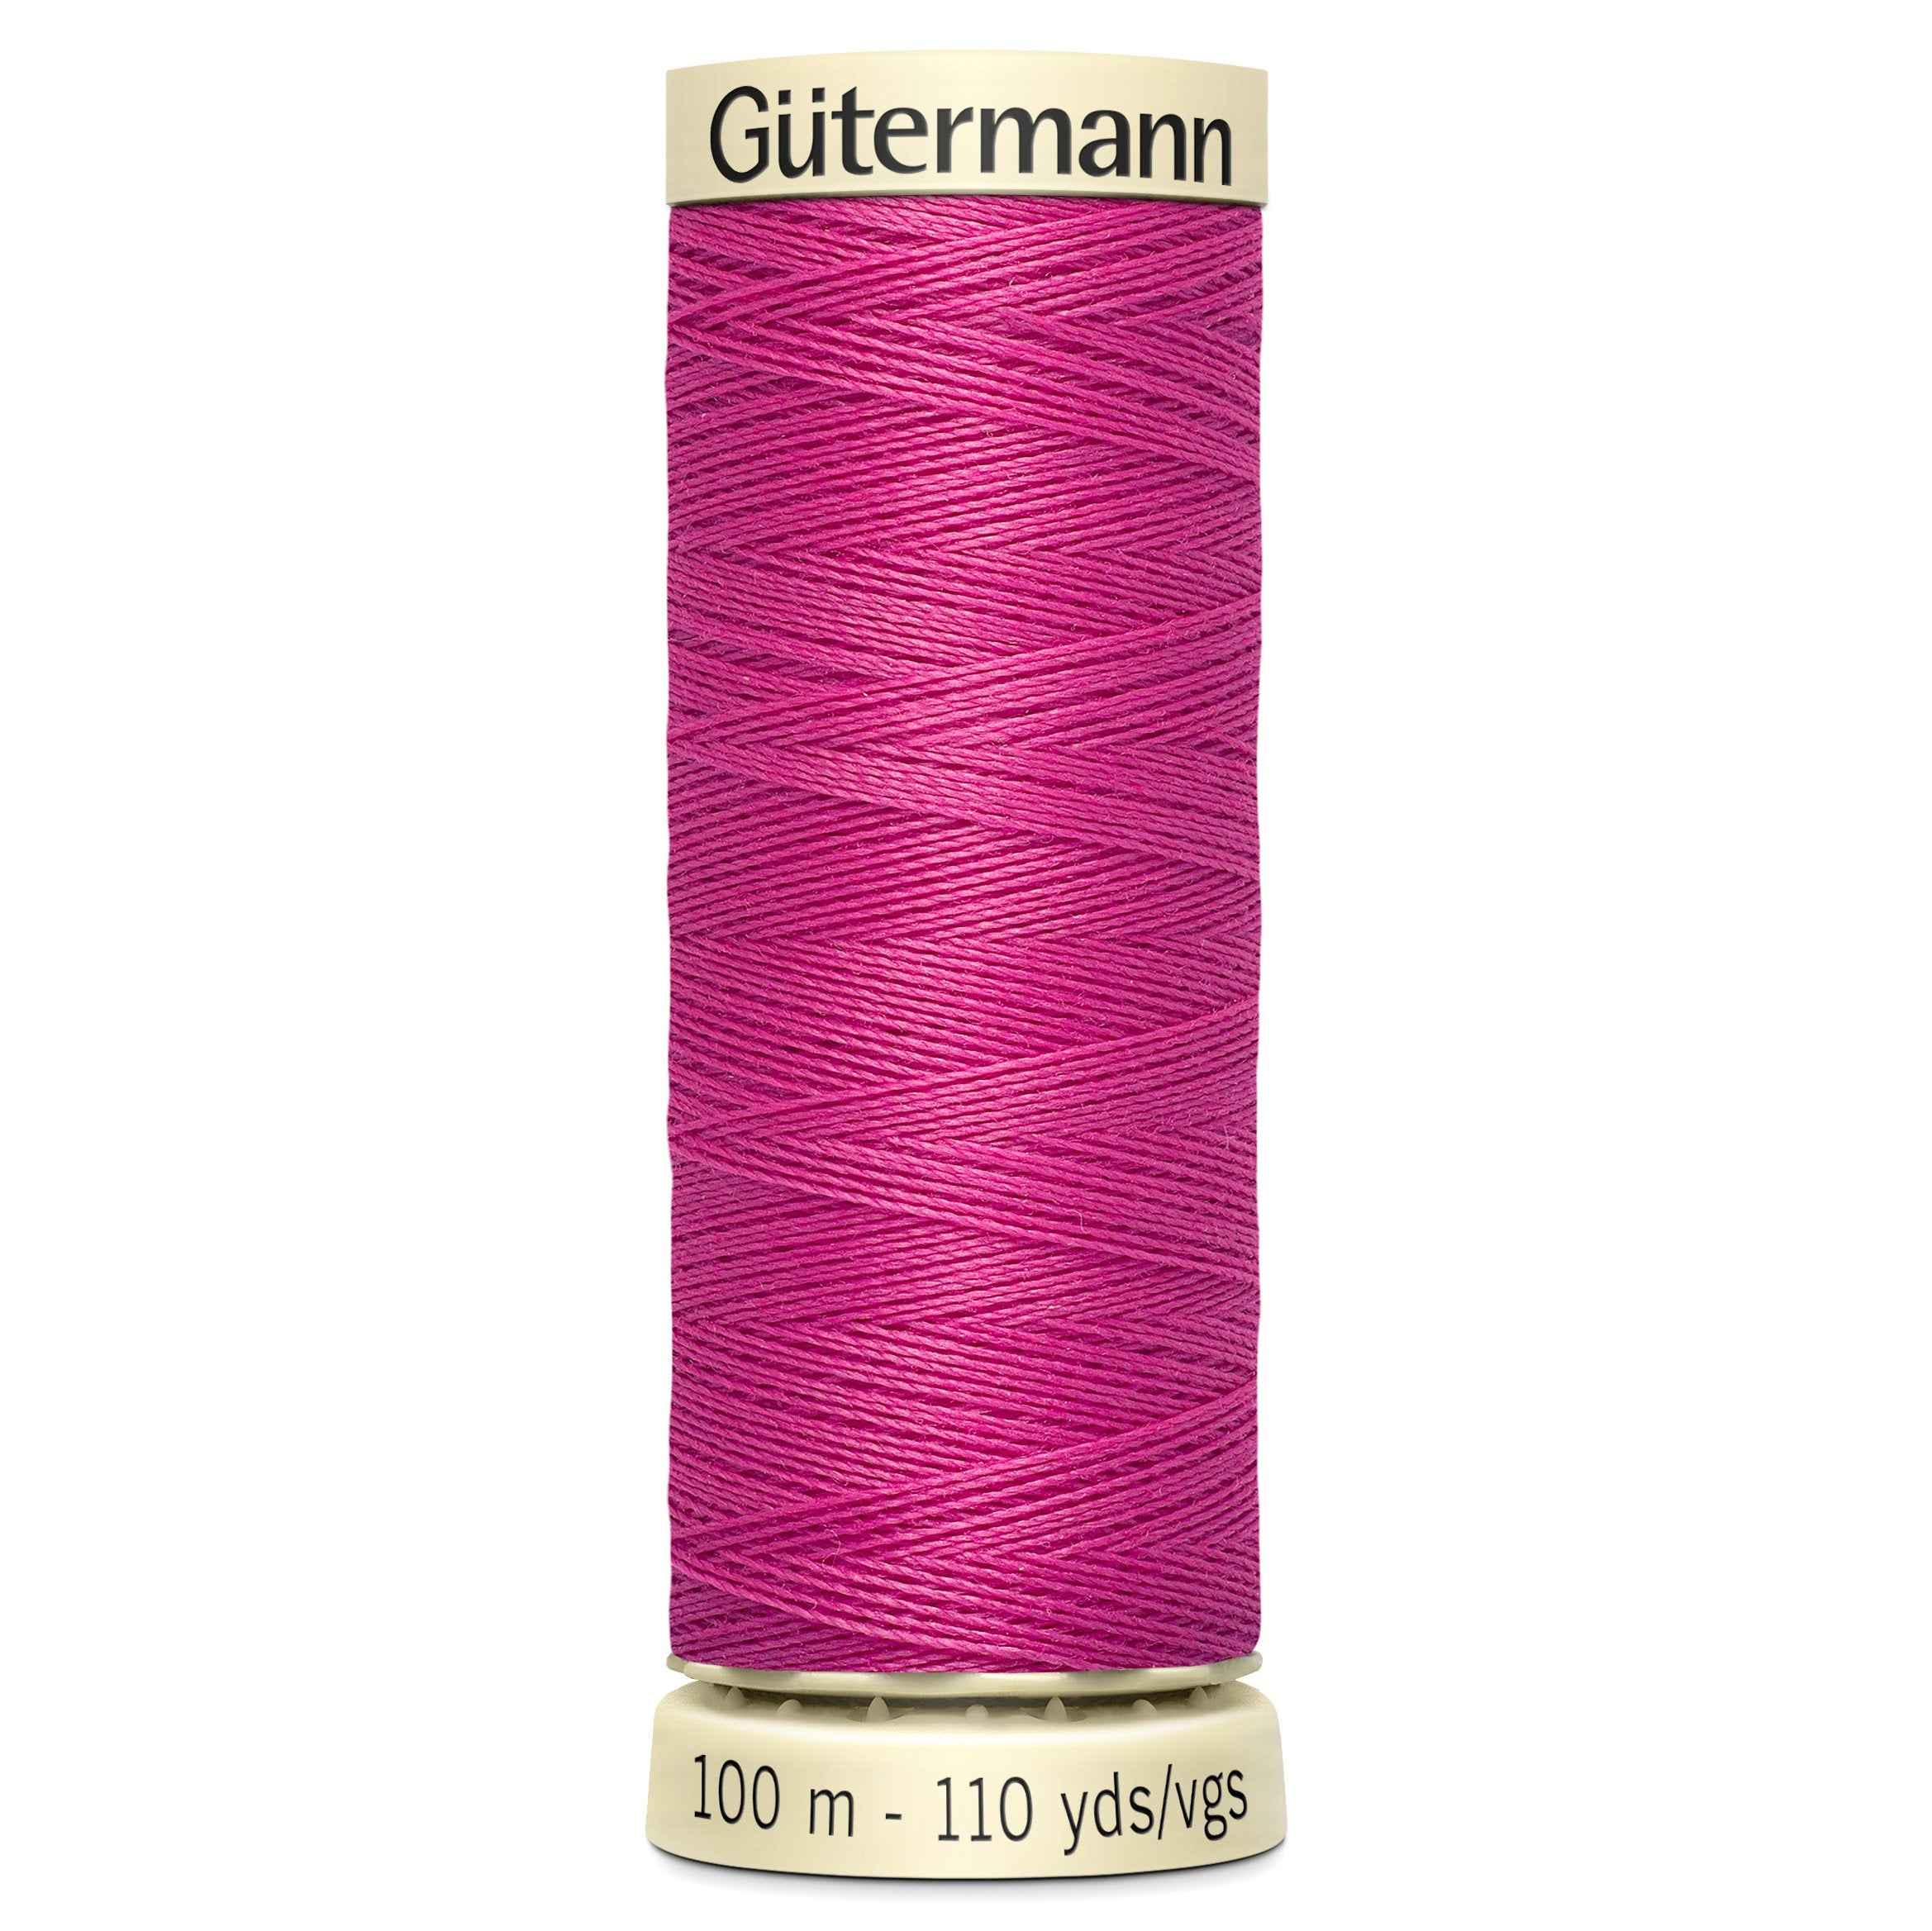 Gutermann Sew All Thread colour 733 Pink from Jaycotts Sewing Supplies